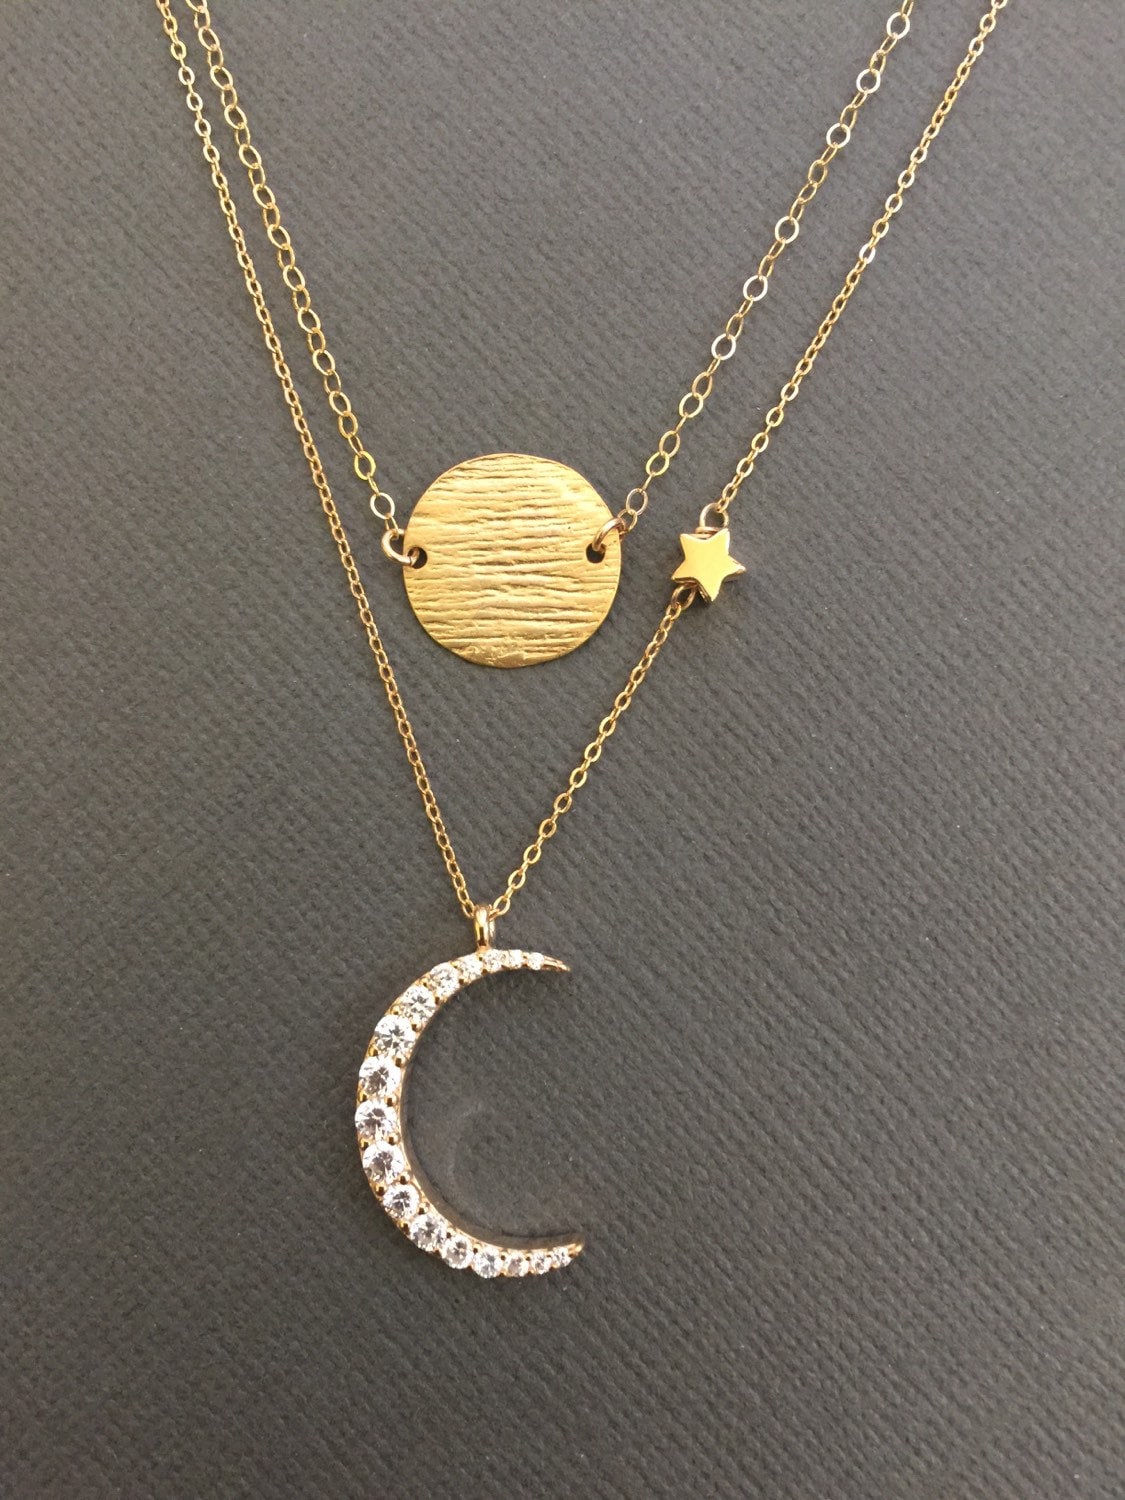 Moon and sun Necklace set Layered Necklace layering Moon and